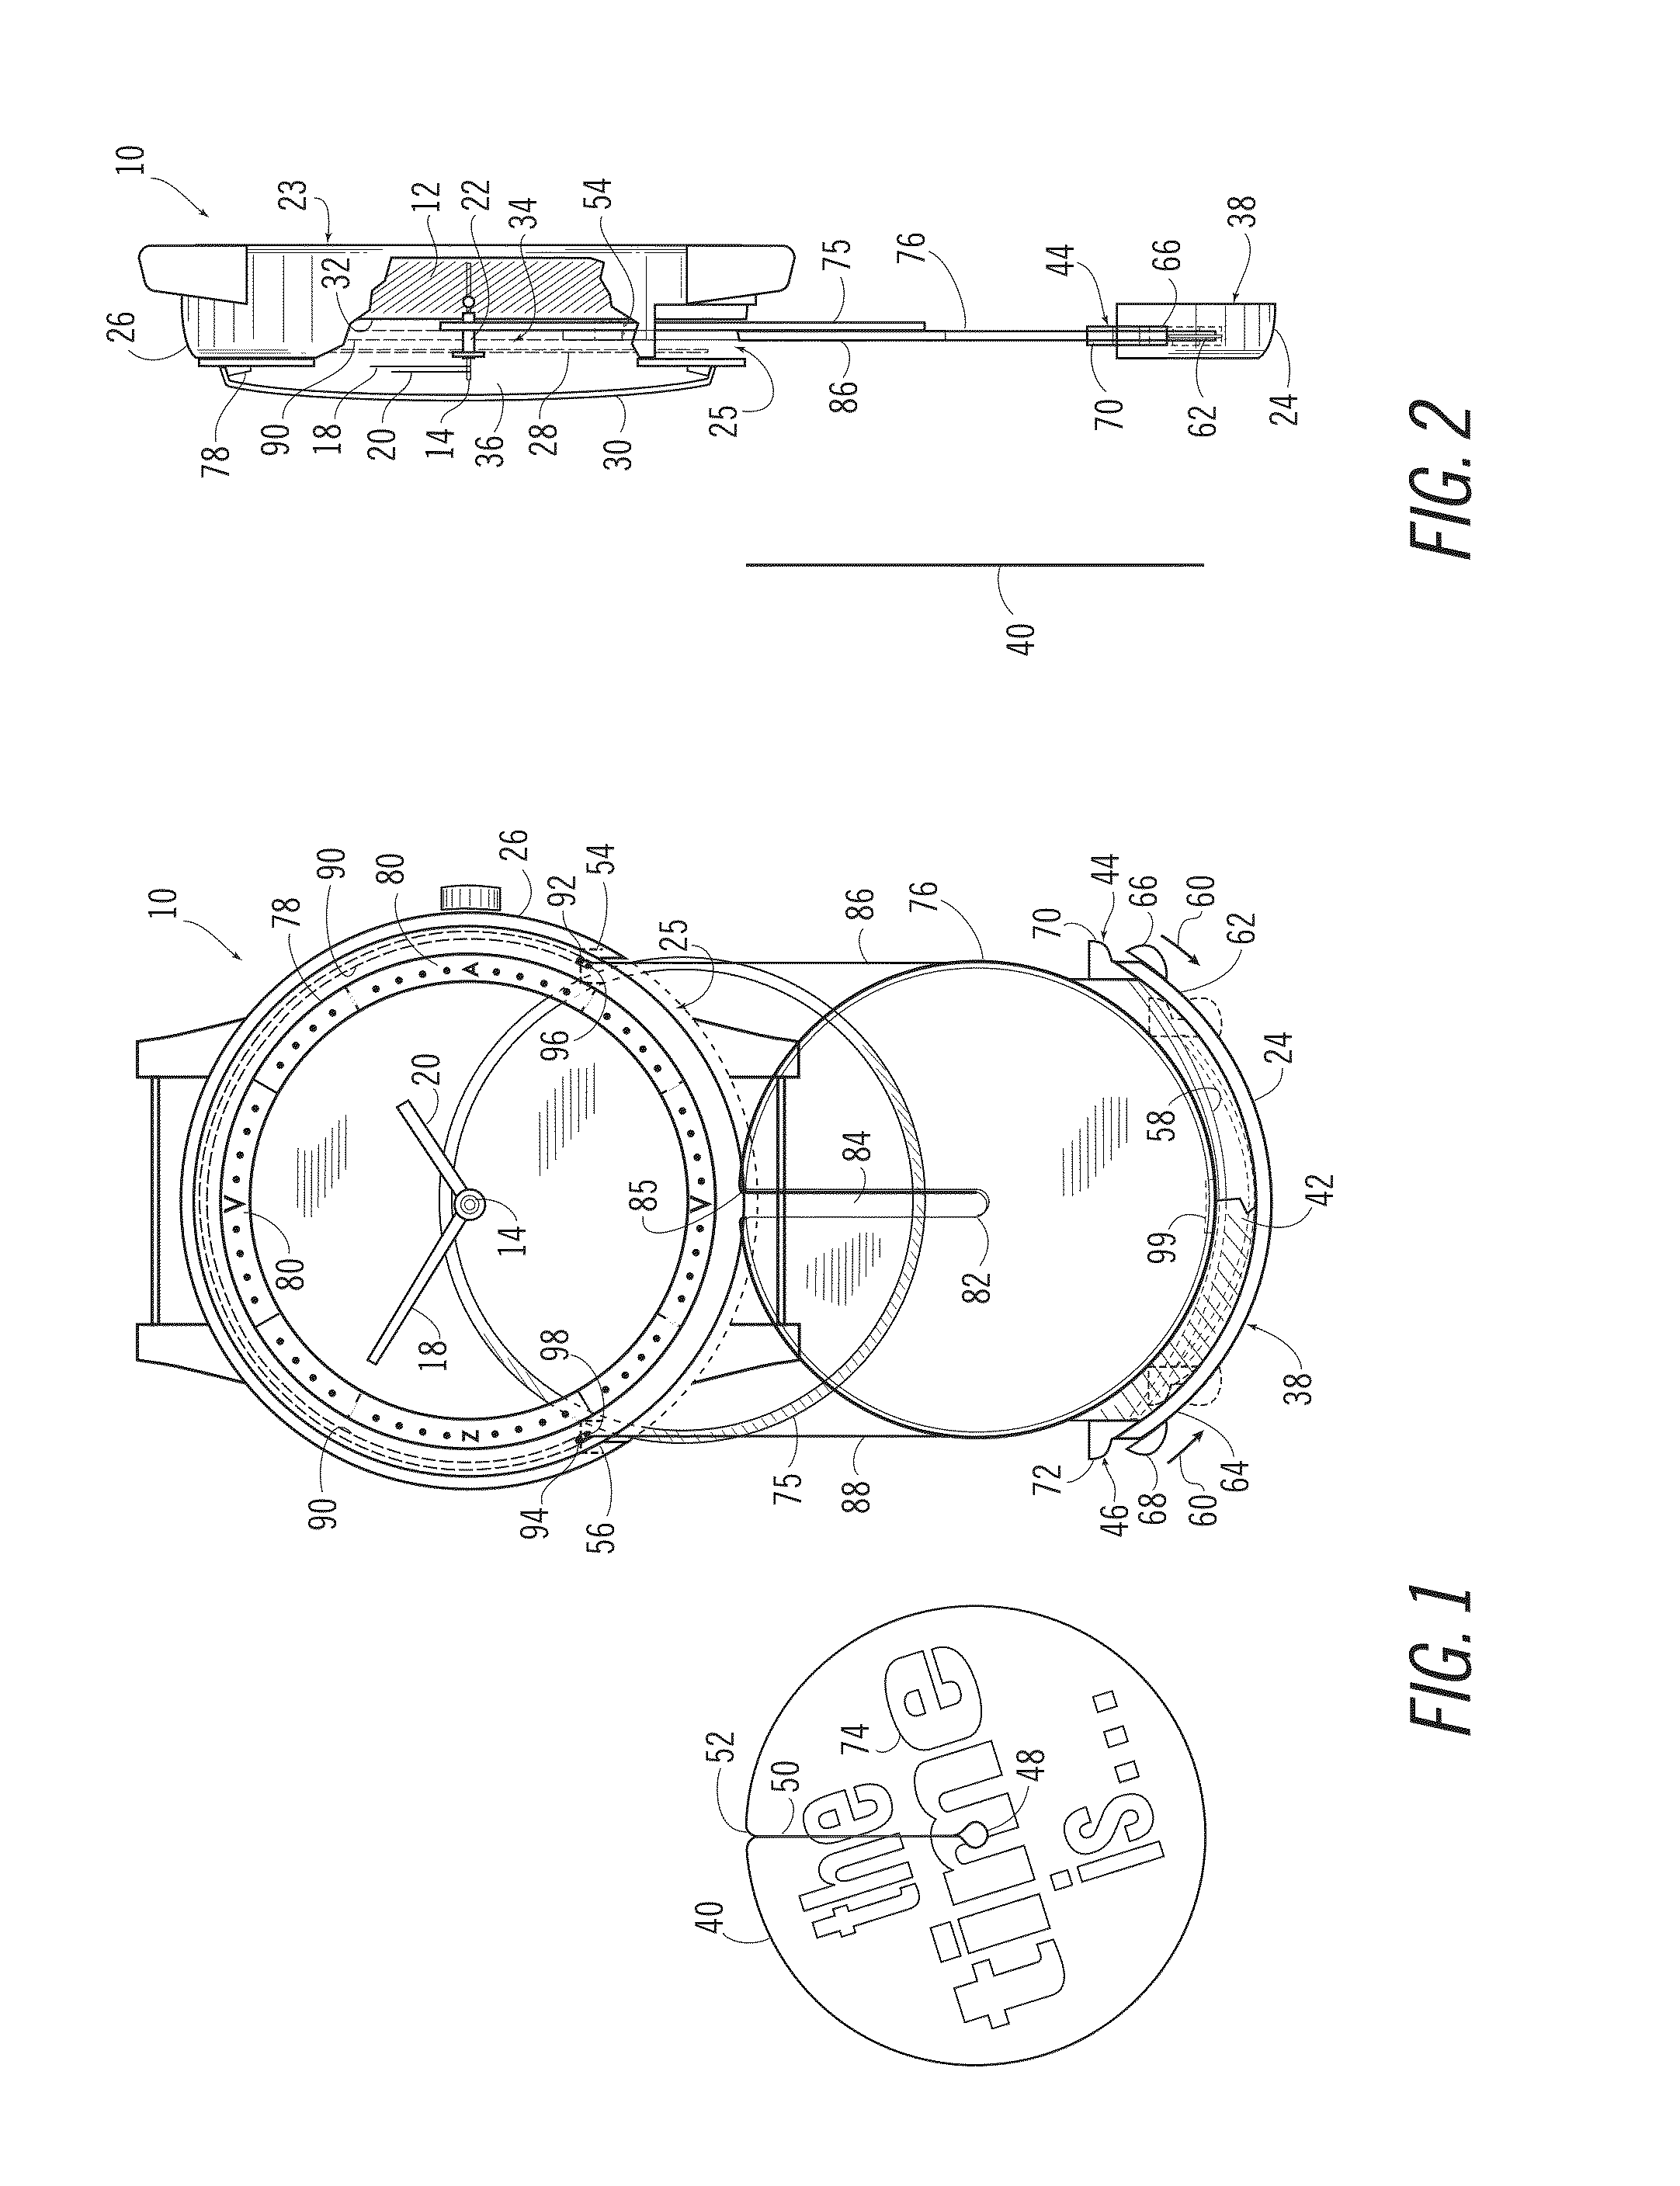 Apparatus for Horologe with Removable and Interchangeable Face